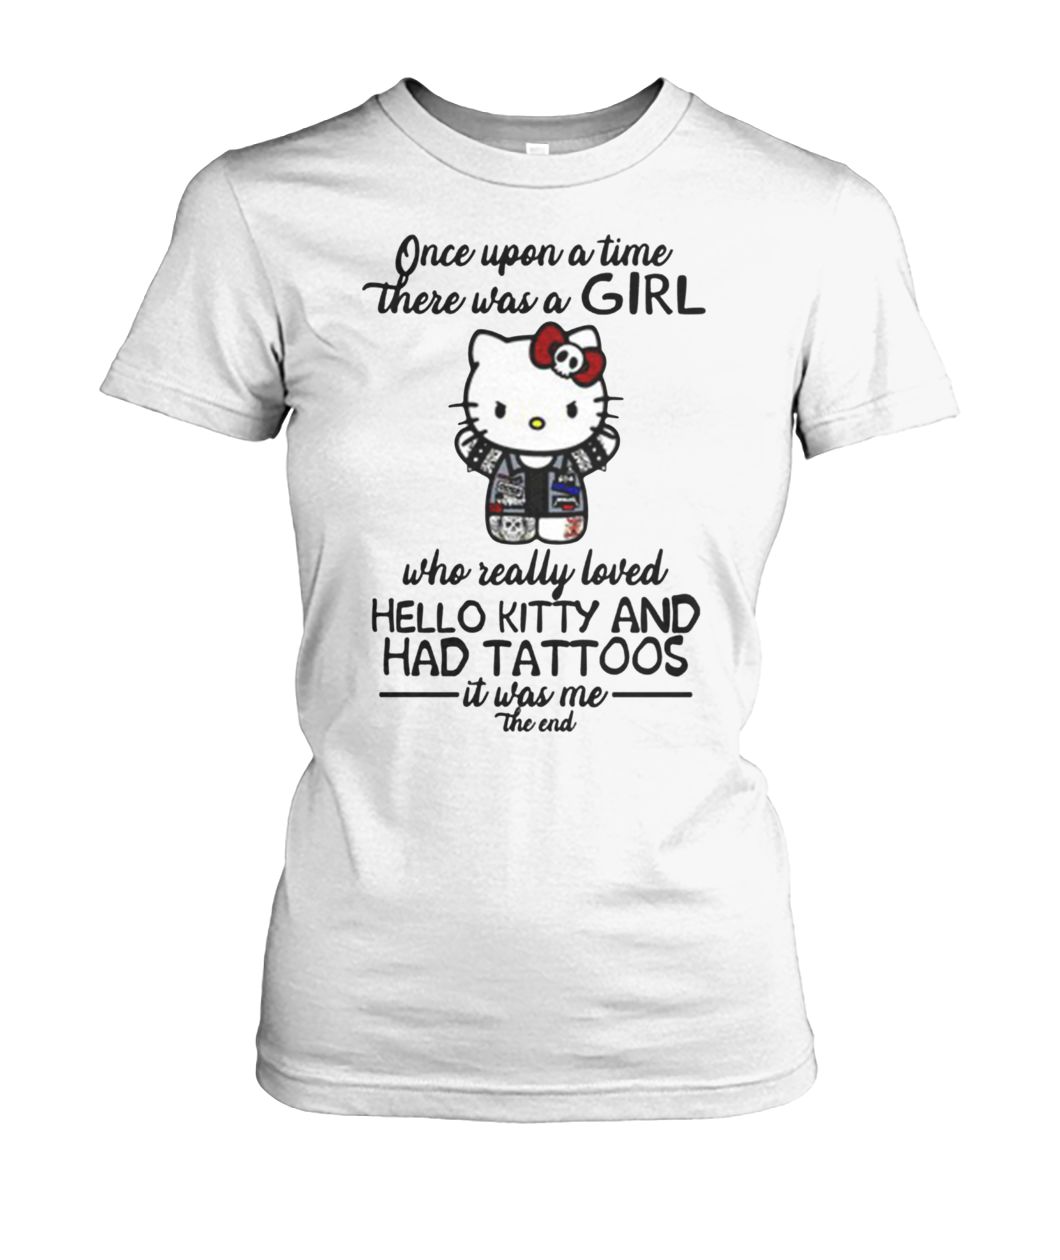 Once upon a time there was a girl who really loved hello kitty and had tattoos it was me women's crew tee